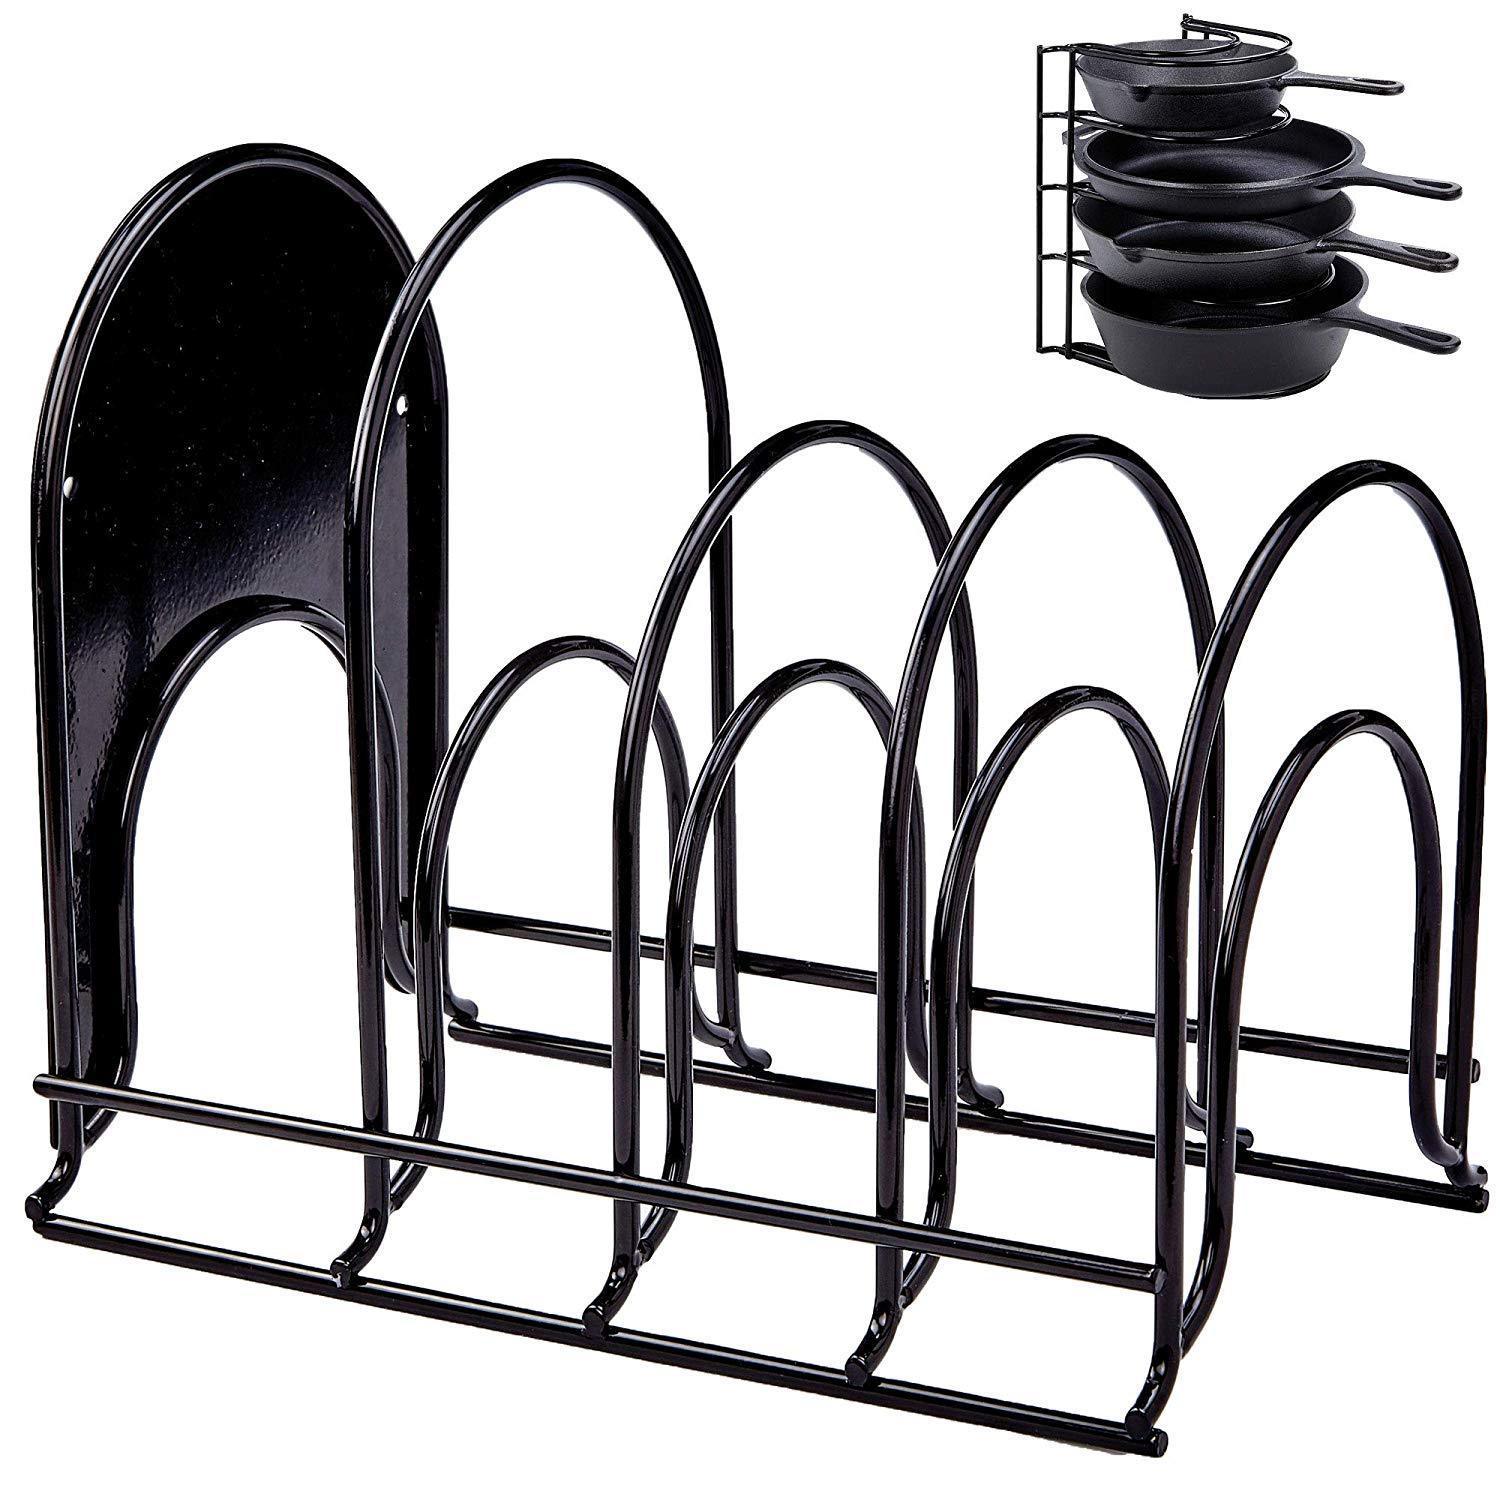 Cuisinel Heavy Duty Pan Organizer, 5 Tier Rack - Holds Up to 50 lb - Holds Cast Iron Skillets, Griddles and Shallow Pots - Durable Steel Construction - Space